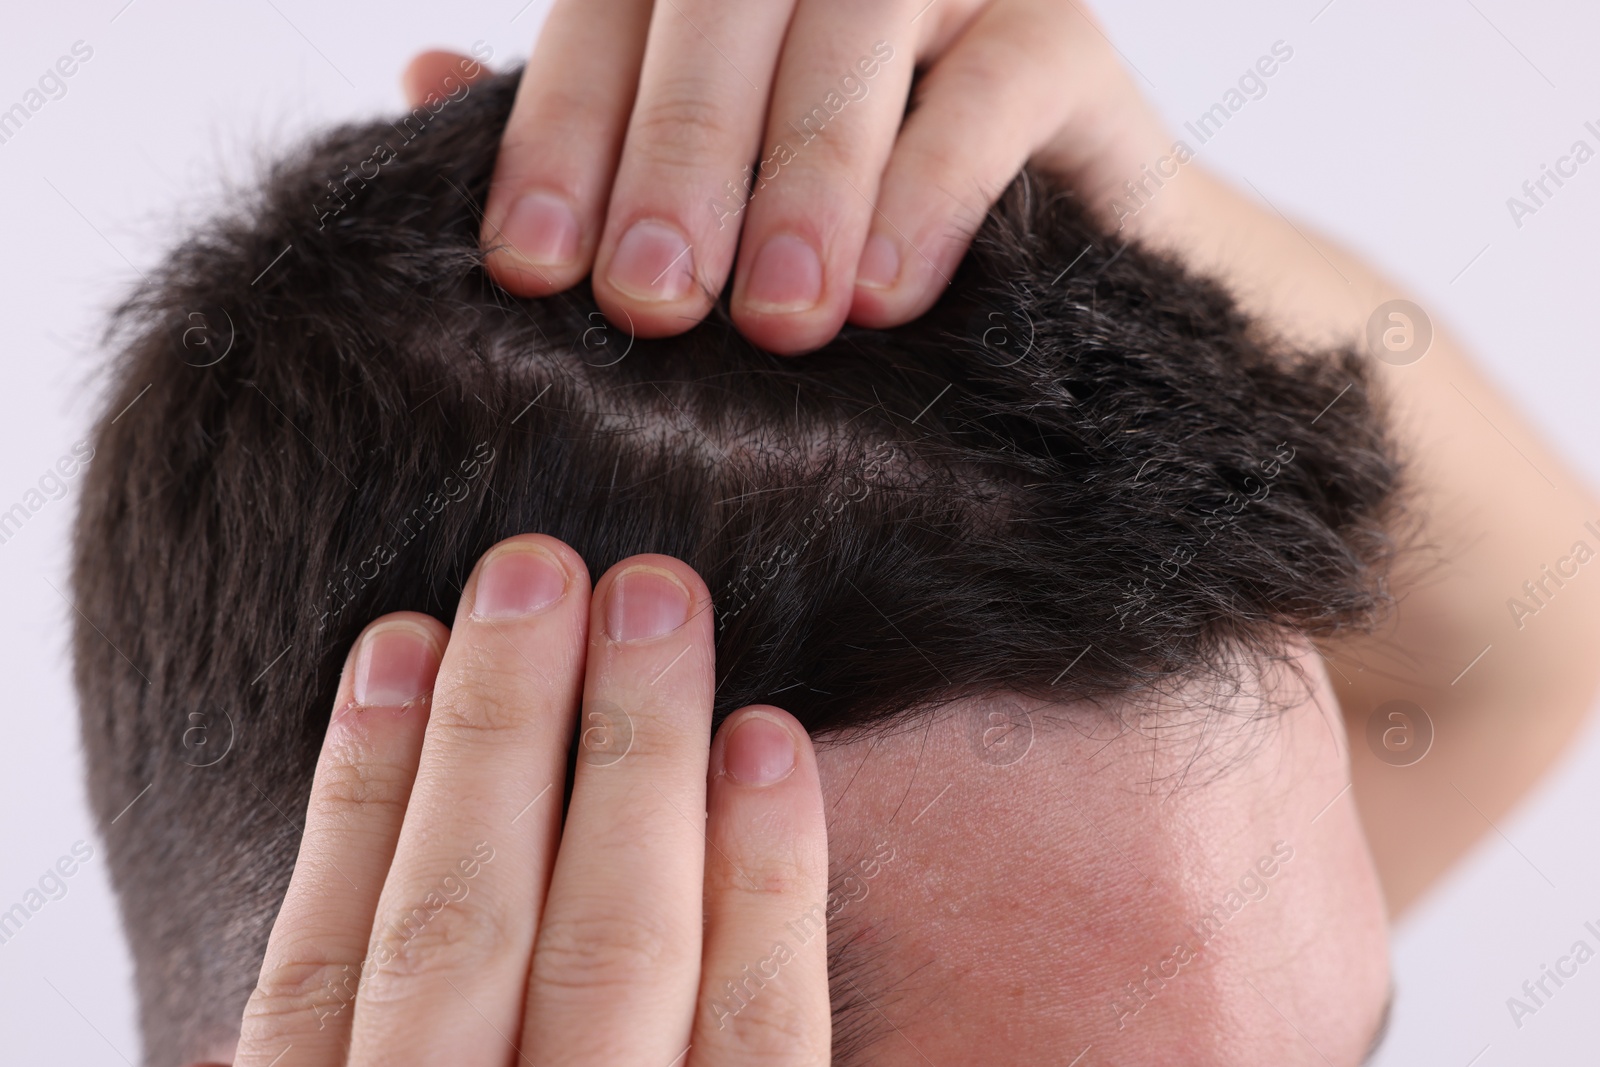 Photo of Man examining his hair and scalp on white background, closeup